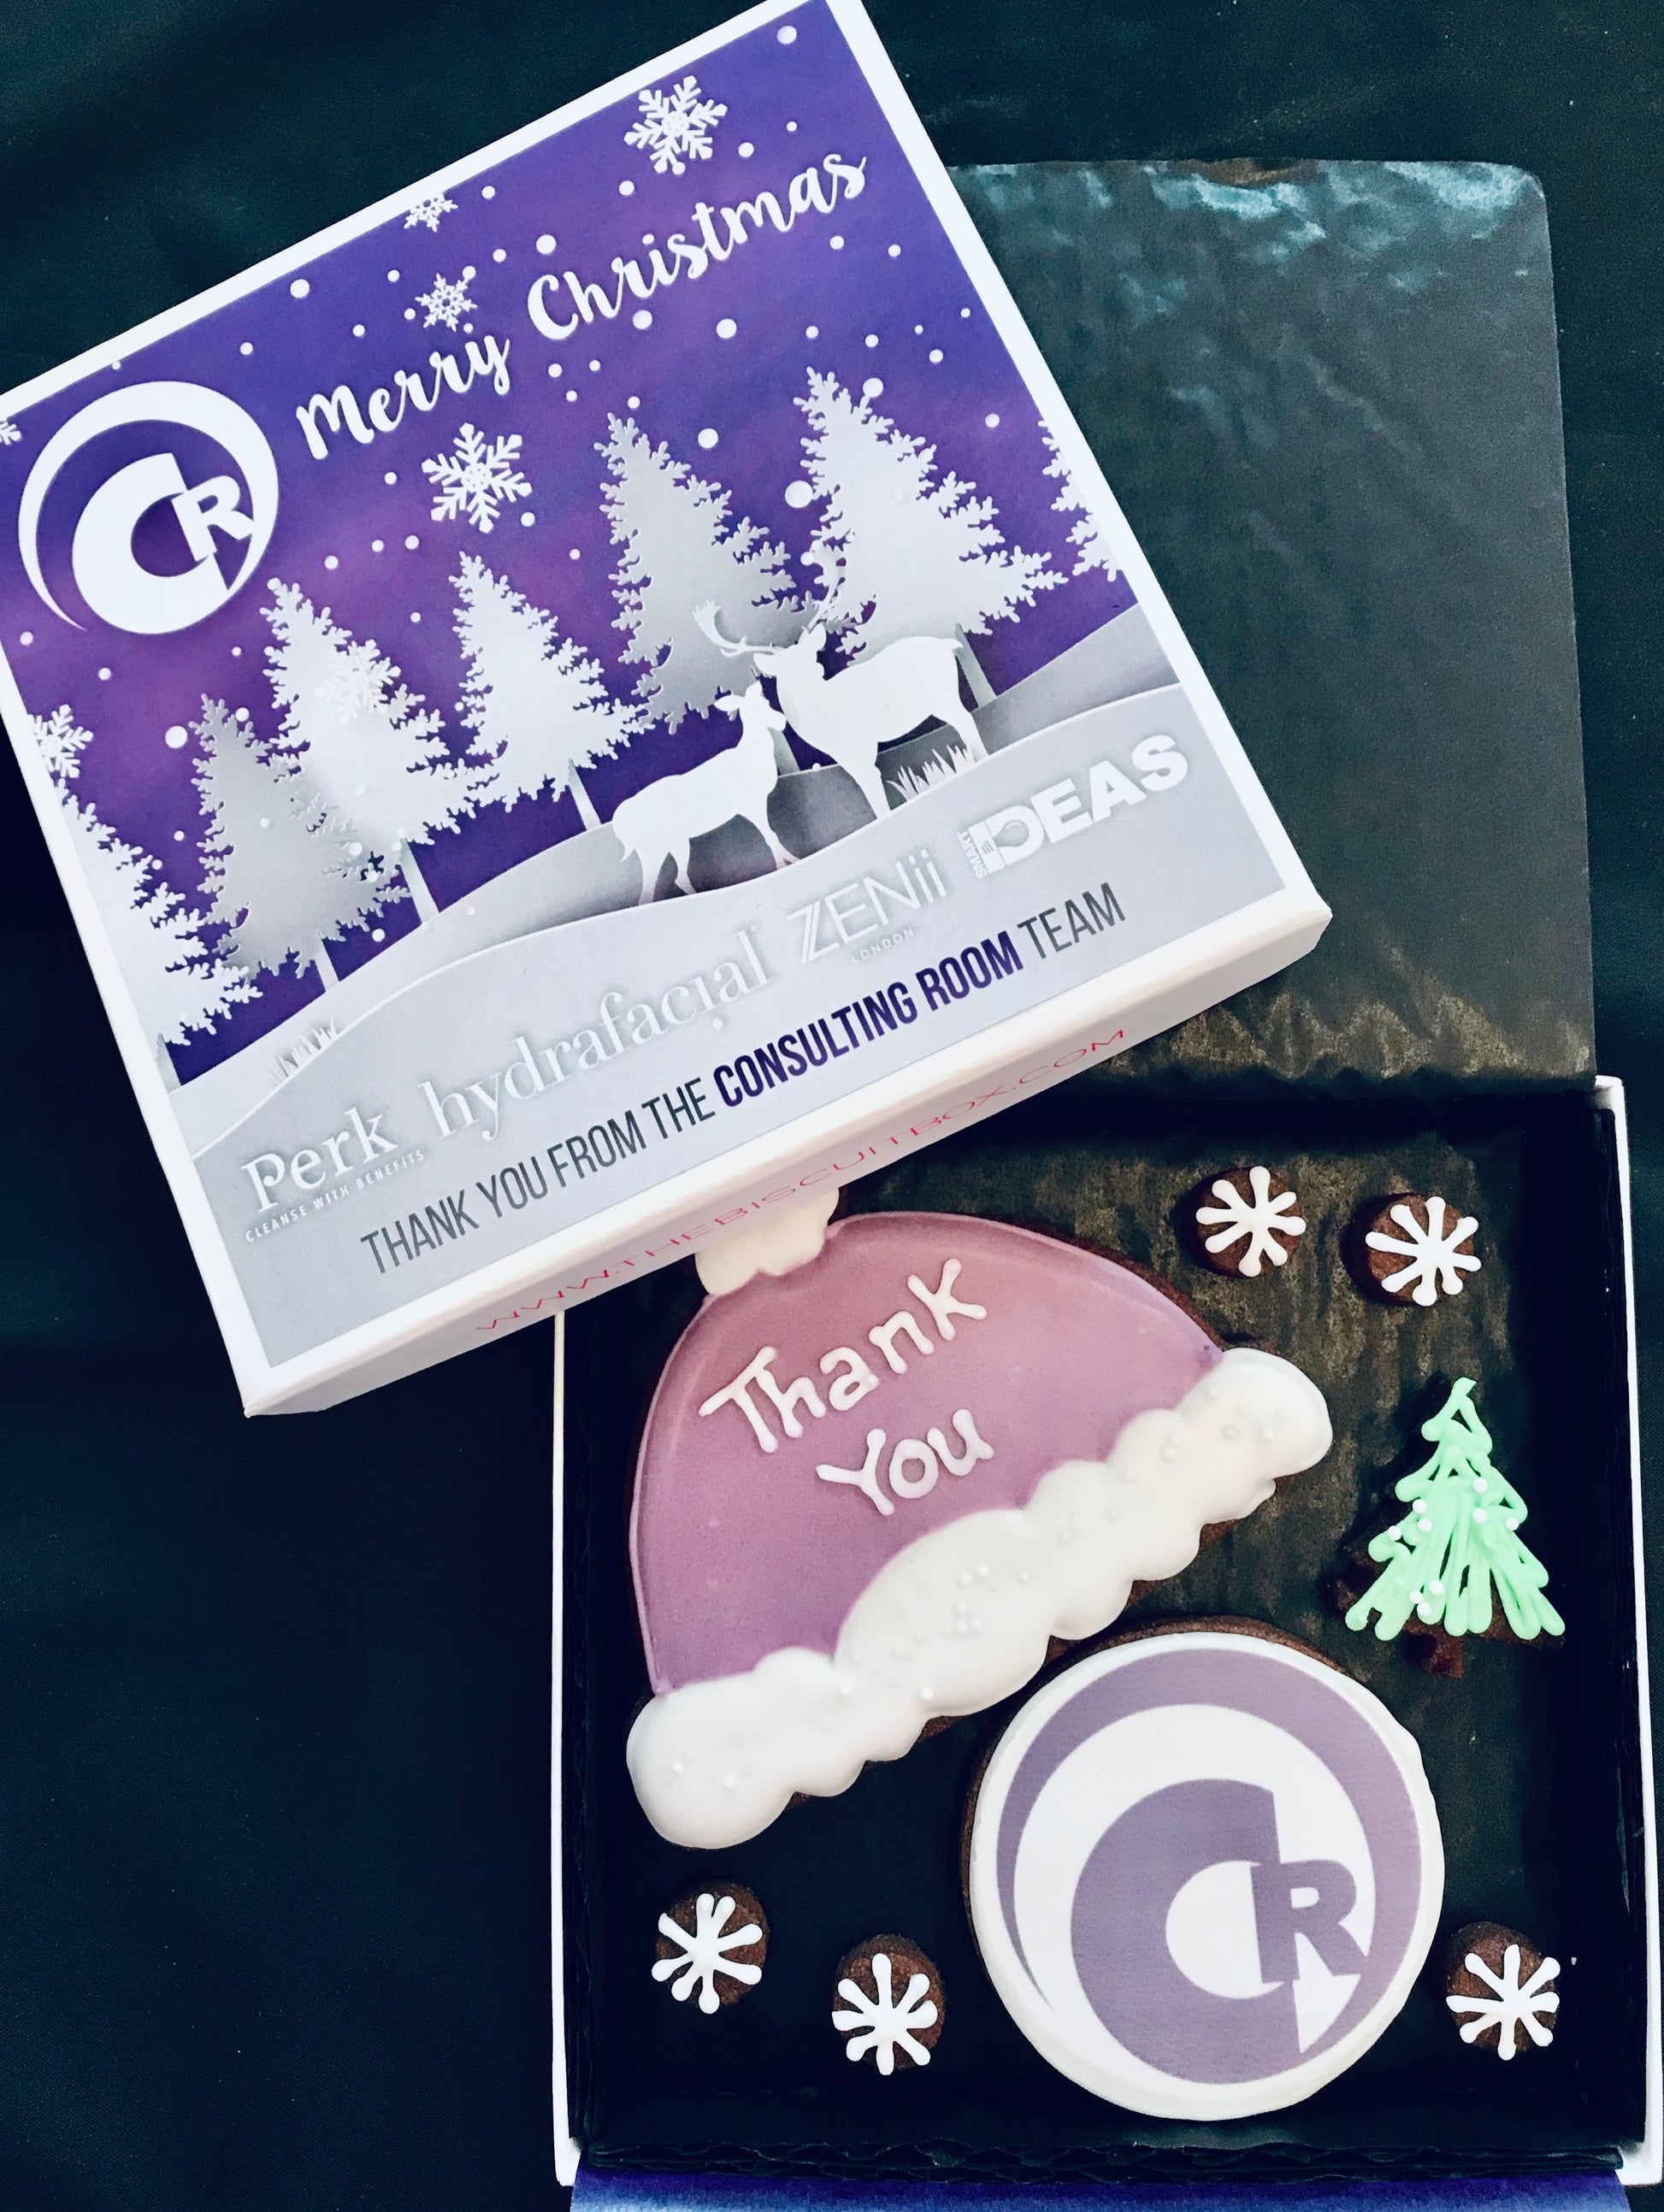 purple corporate Christmas biscuits. Branded biscuit box lid with customers logo and matching purple cookies.